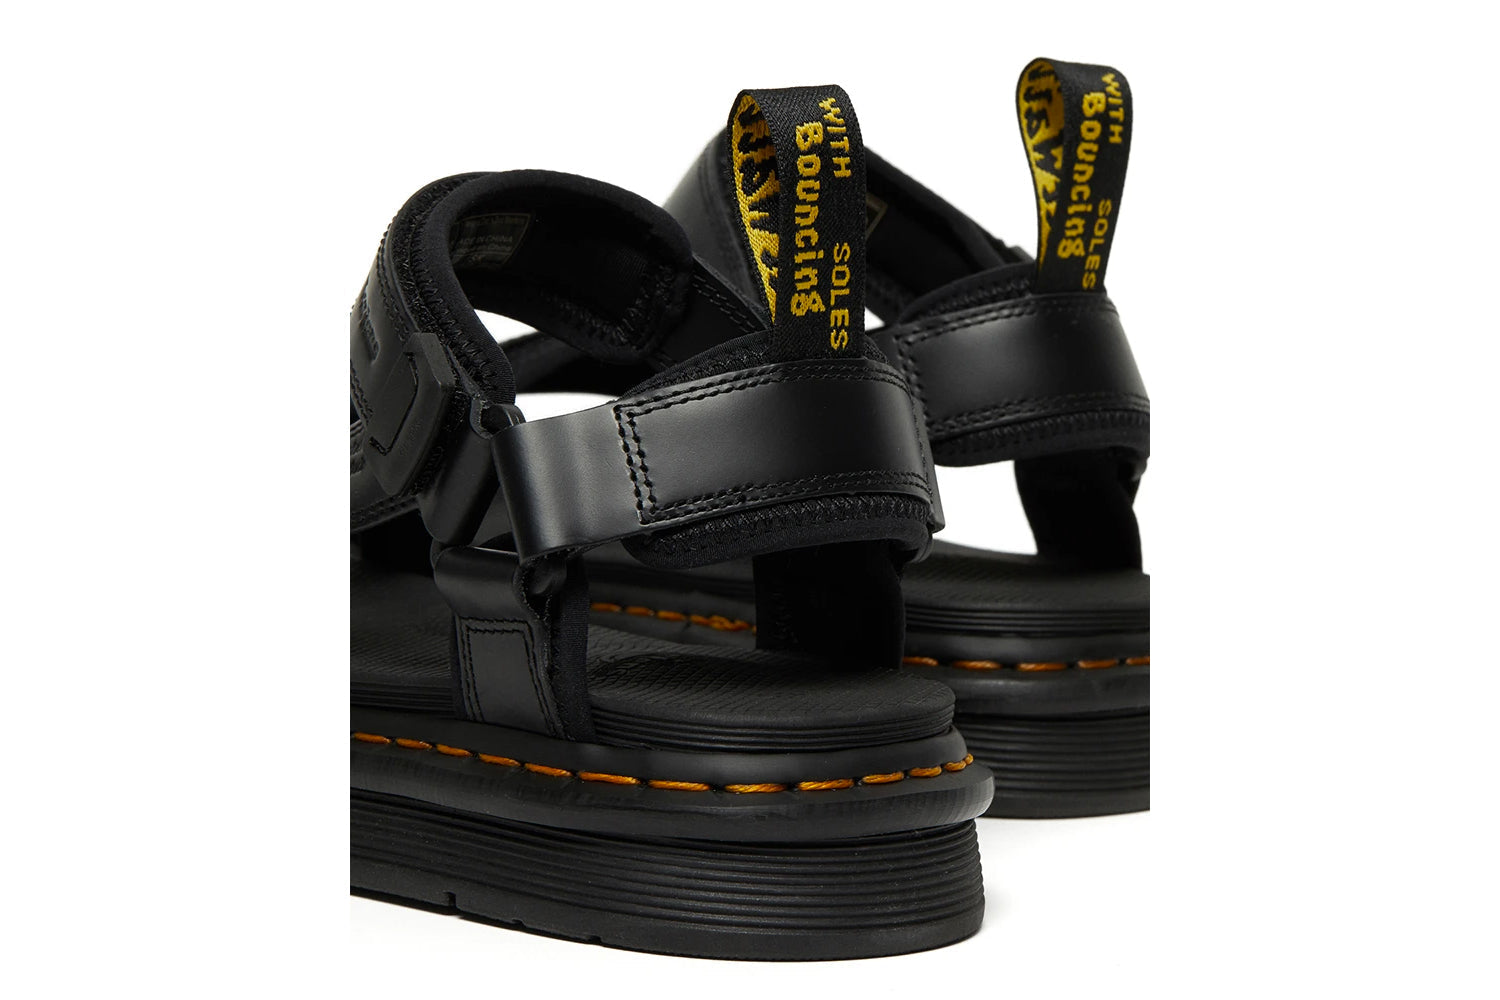 SUICOKE Dr. Martens Collaboration Edition DEPA Sandals in Black Smooth Leather Official Webstore Spring 2021